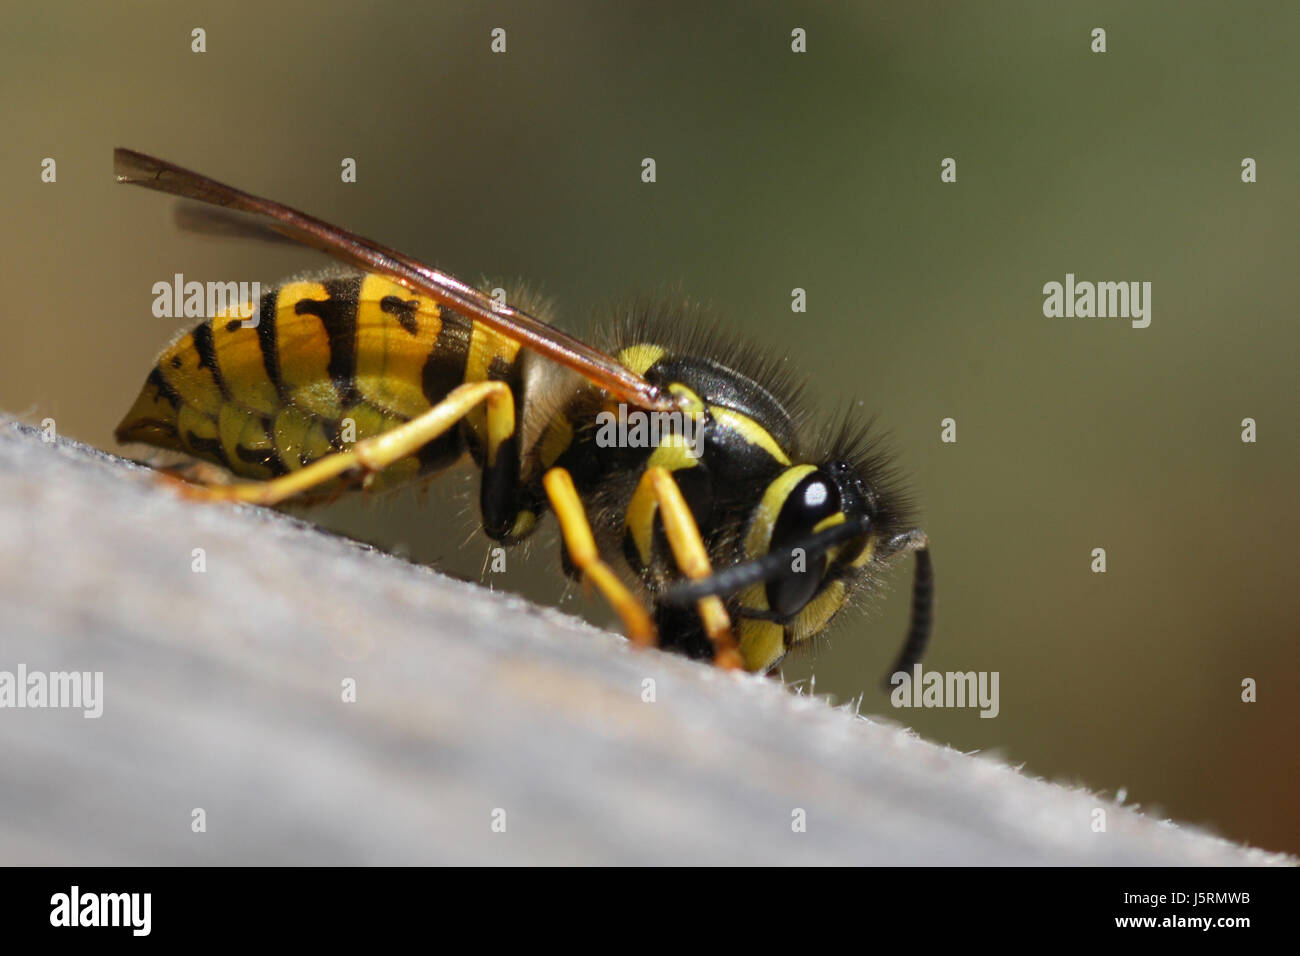 danger macro close-up macro admission close up view insects black swarthy Stock Photo